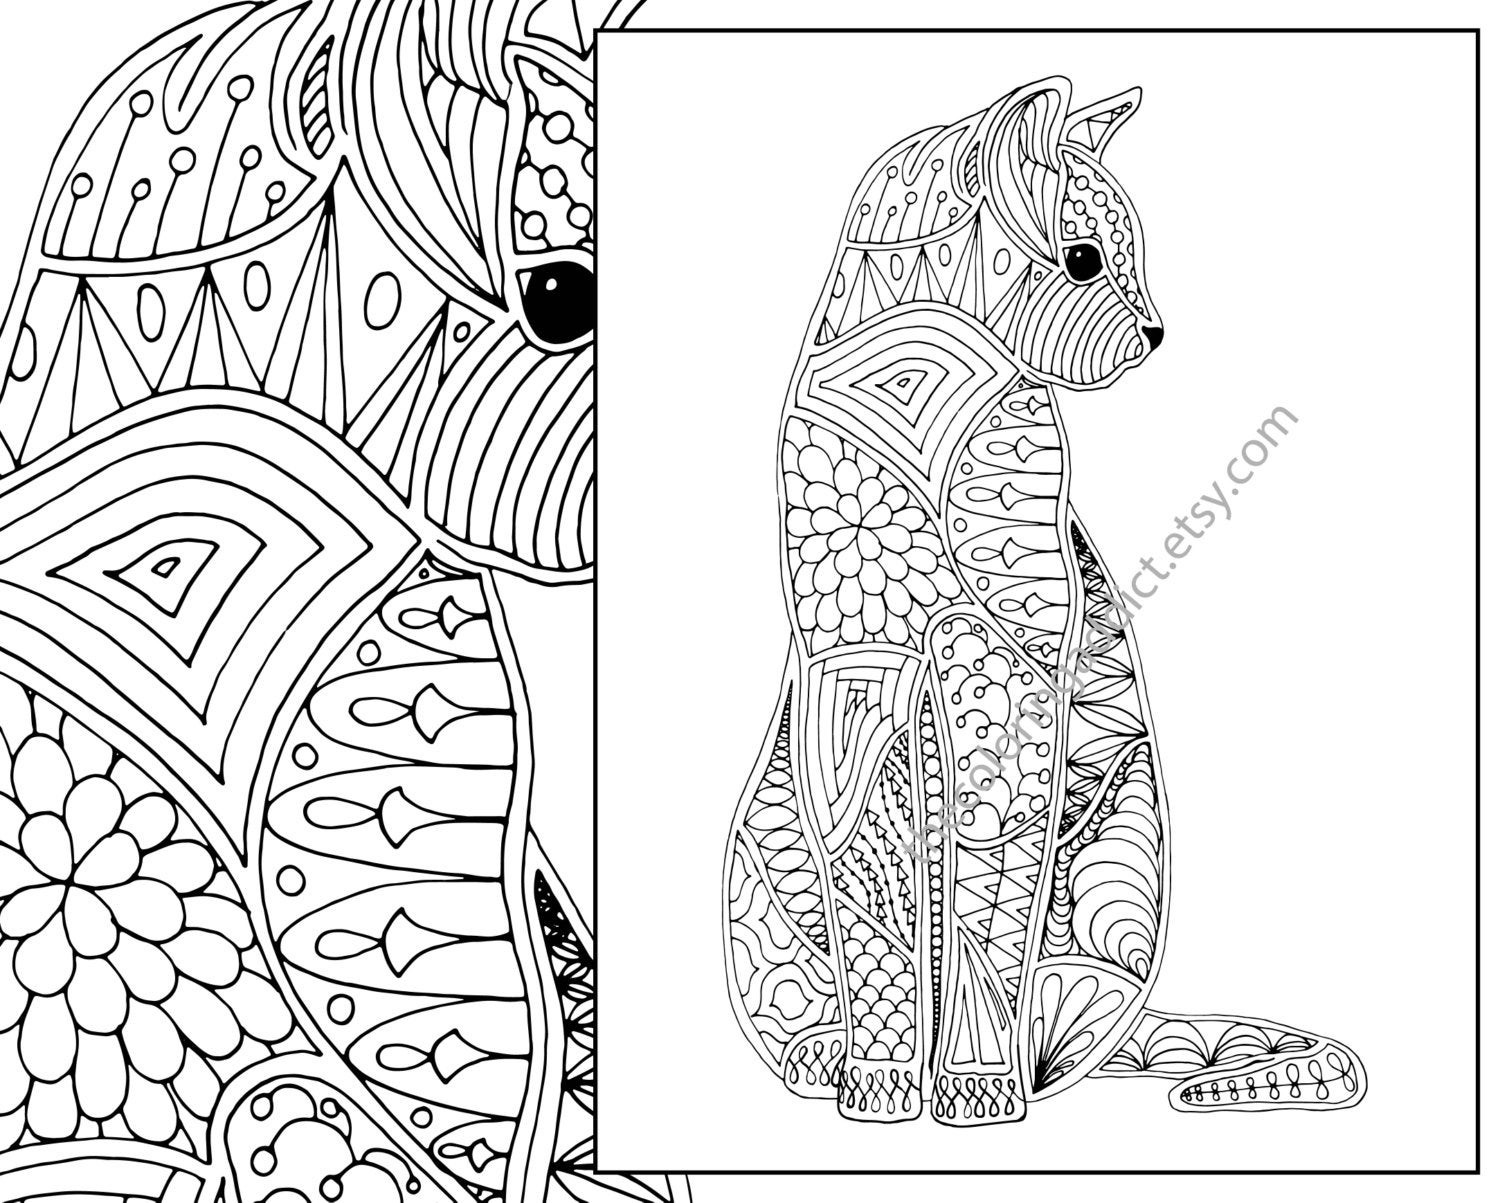 Adult Cat Coloring Pages
 cat coloring page advanced coloring page adult coloring